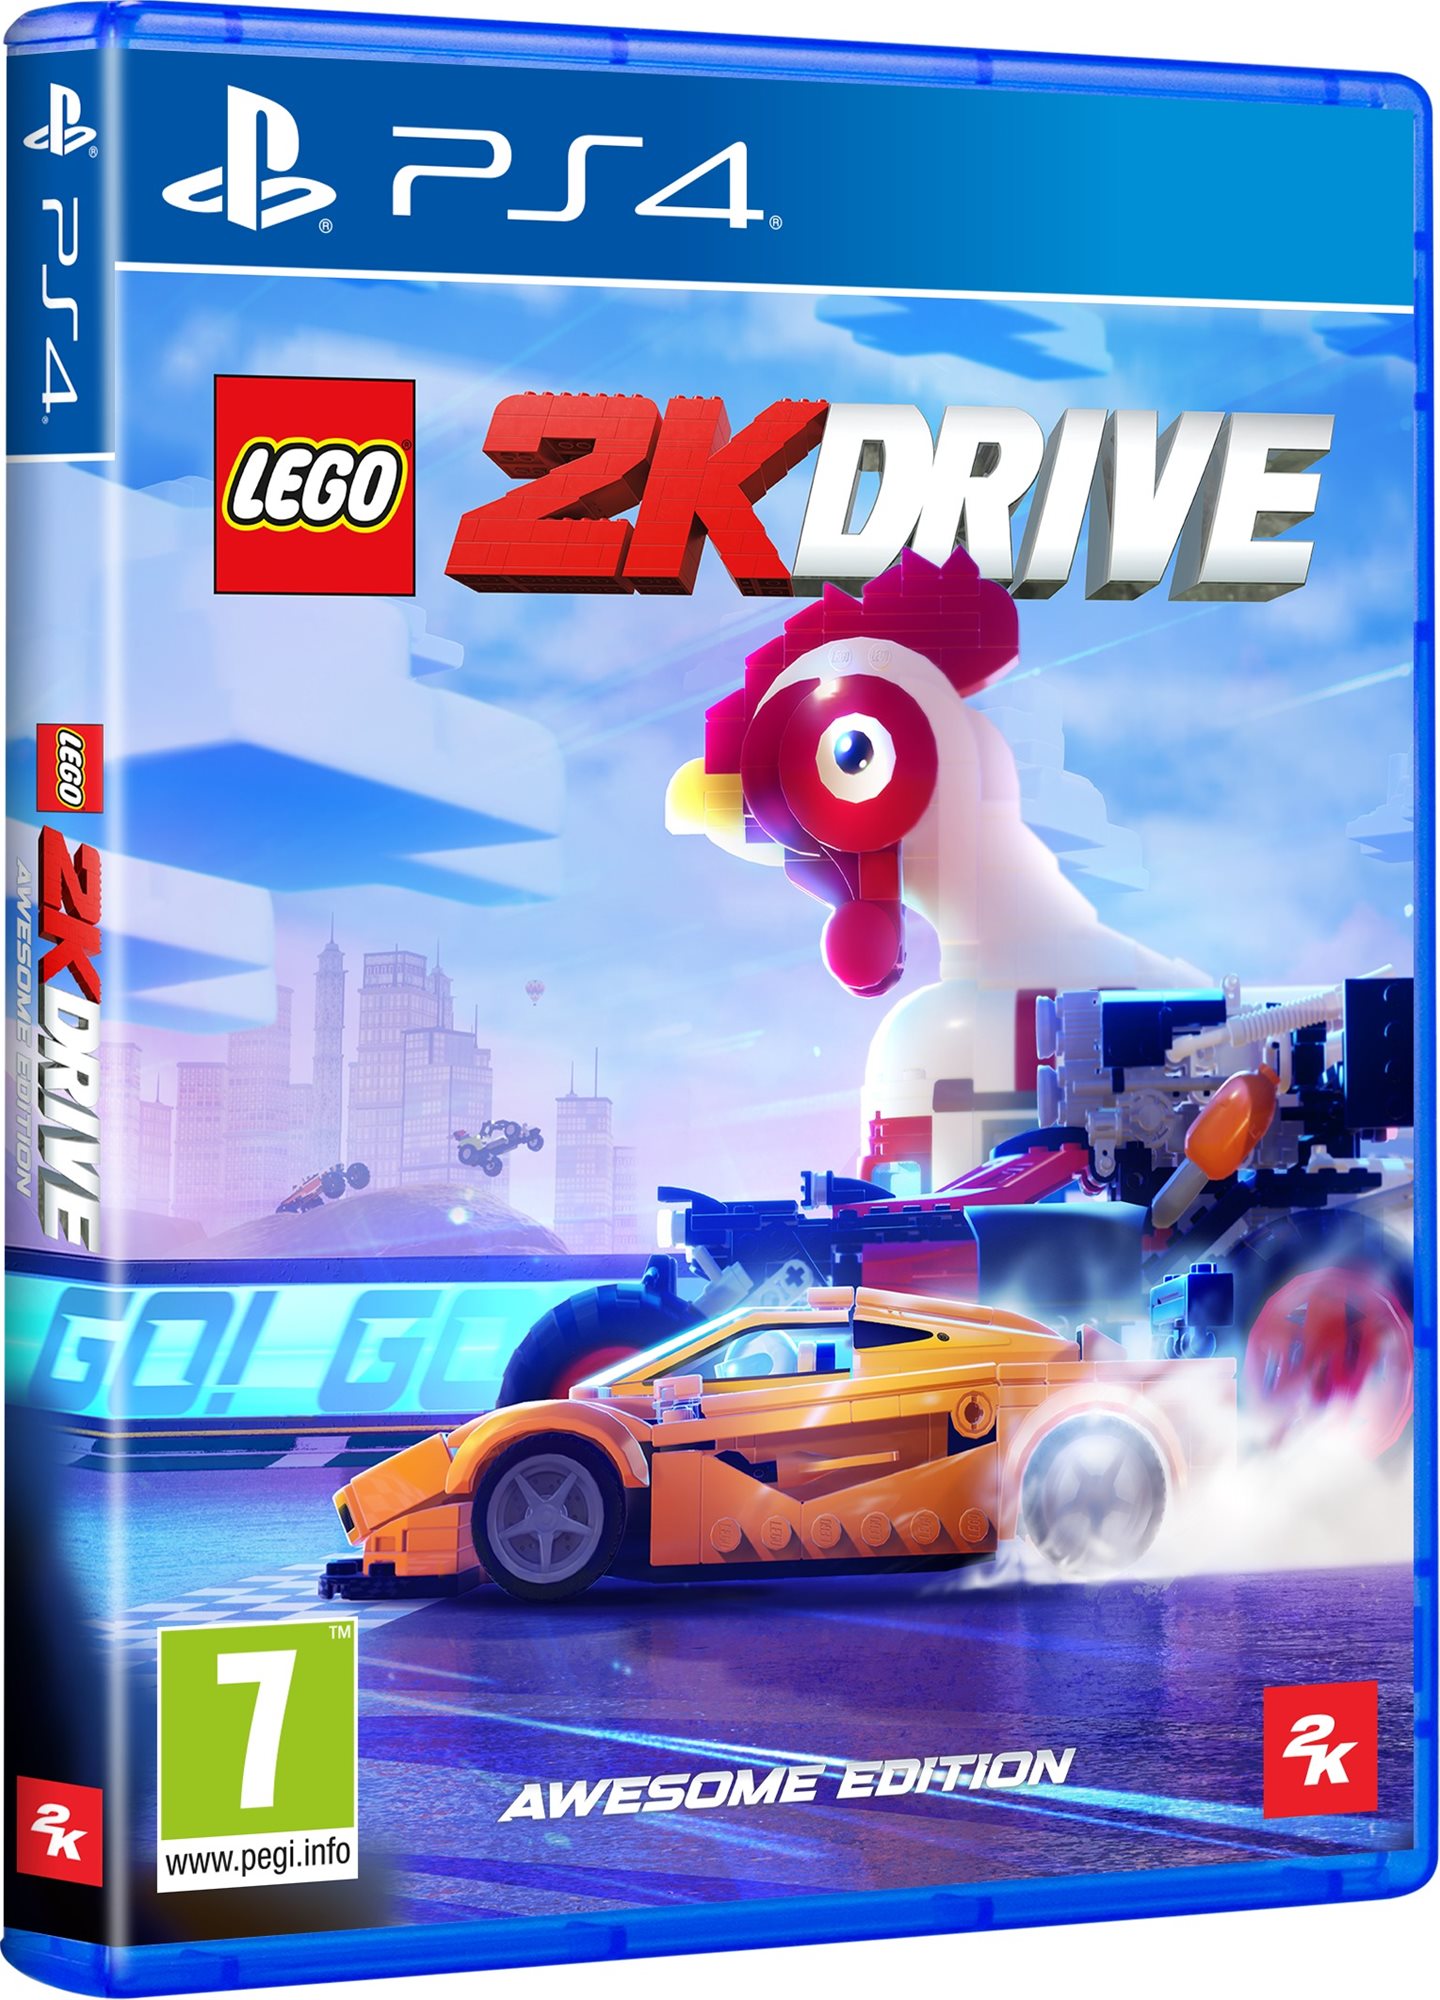 LEGO 2K Drive: Awesome Edition - PS4